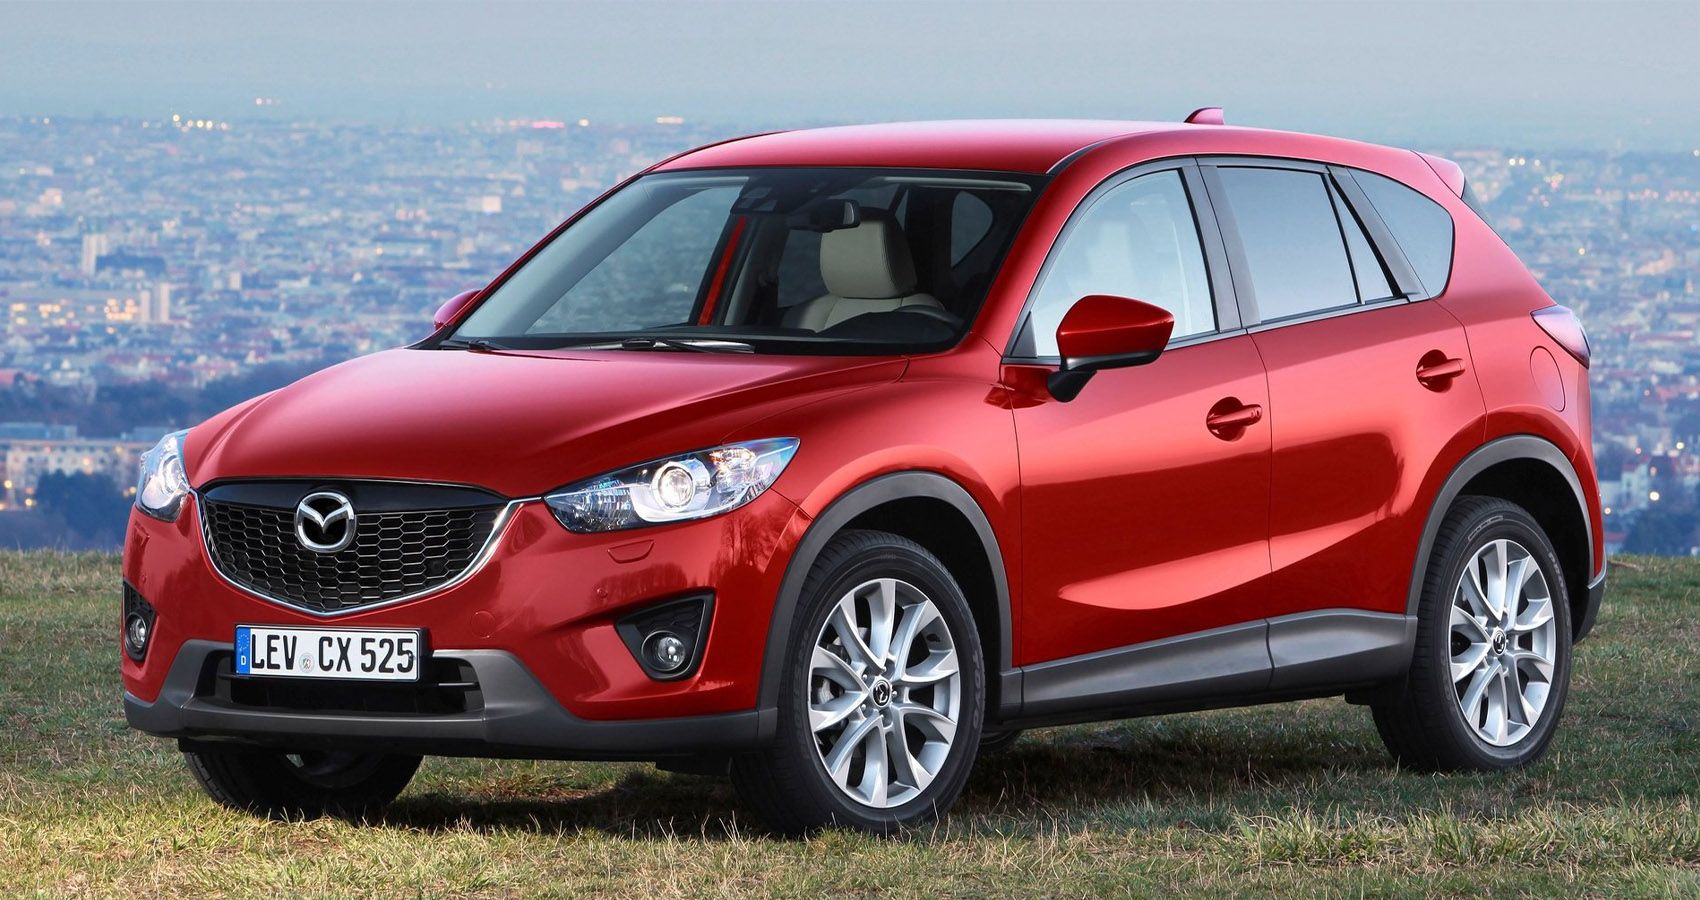 Red 2013 Mazda CX-5 parked